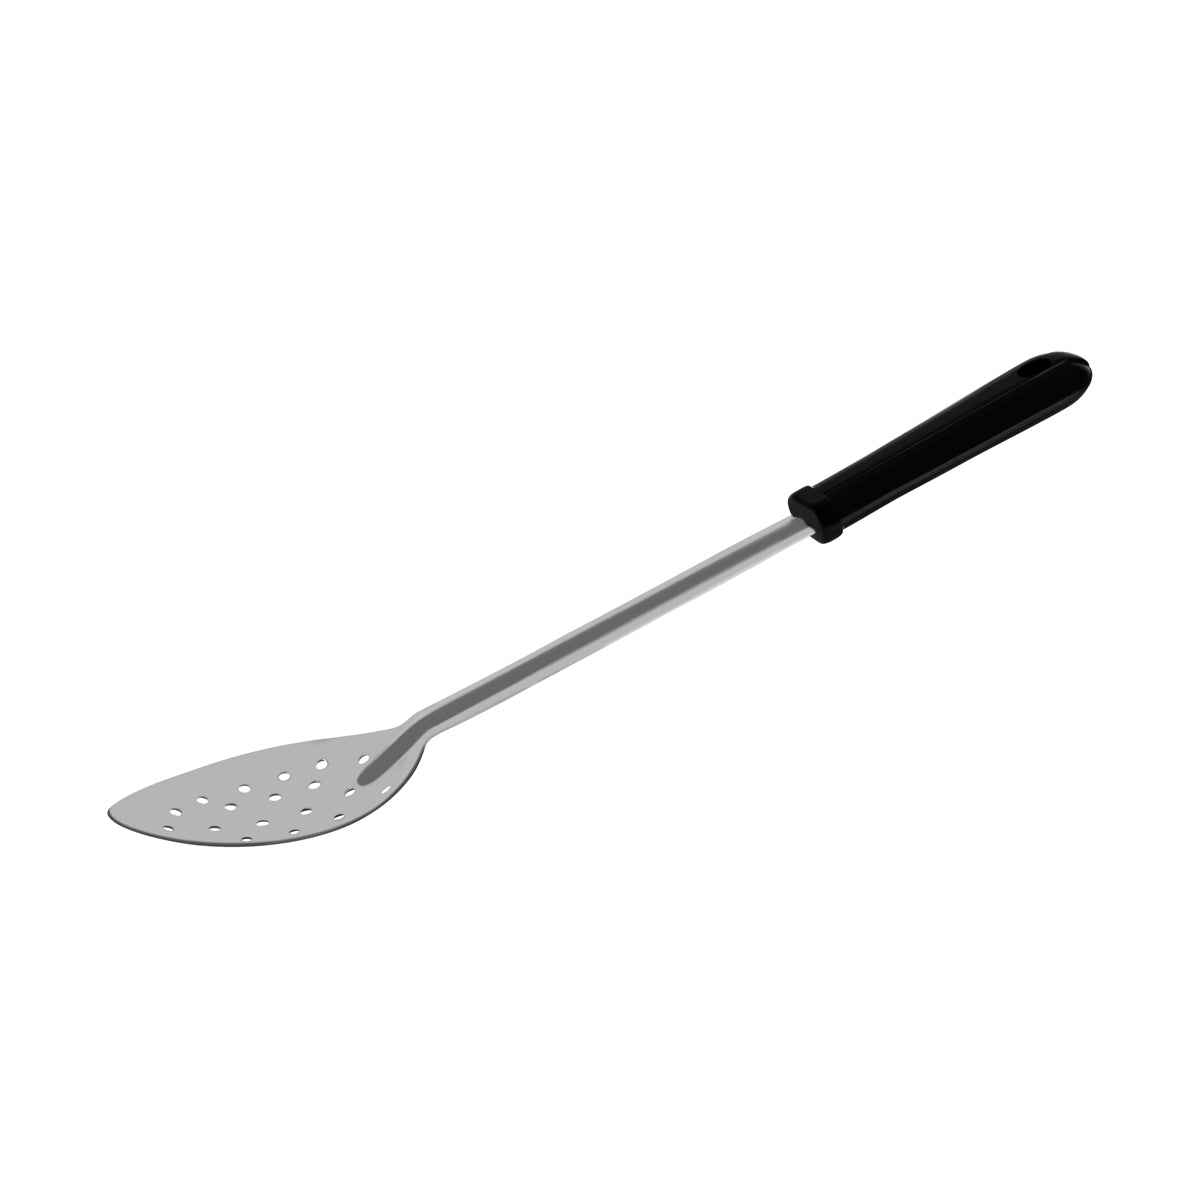 36125 Chef Inox Spoon Basting Perforated with Polypropylene Handle 380mm Tomkin Australia Hospitality Supplies